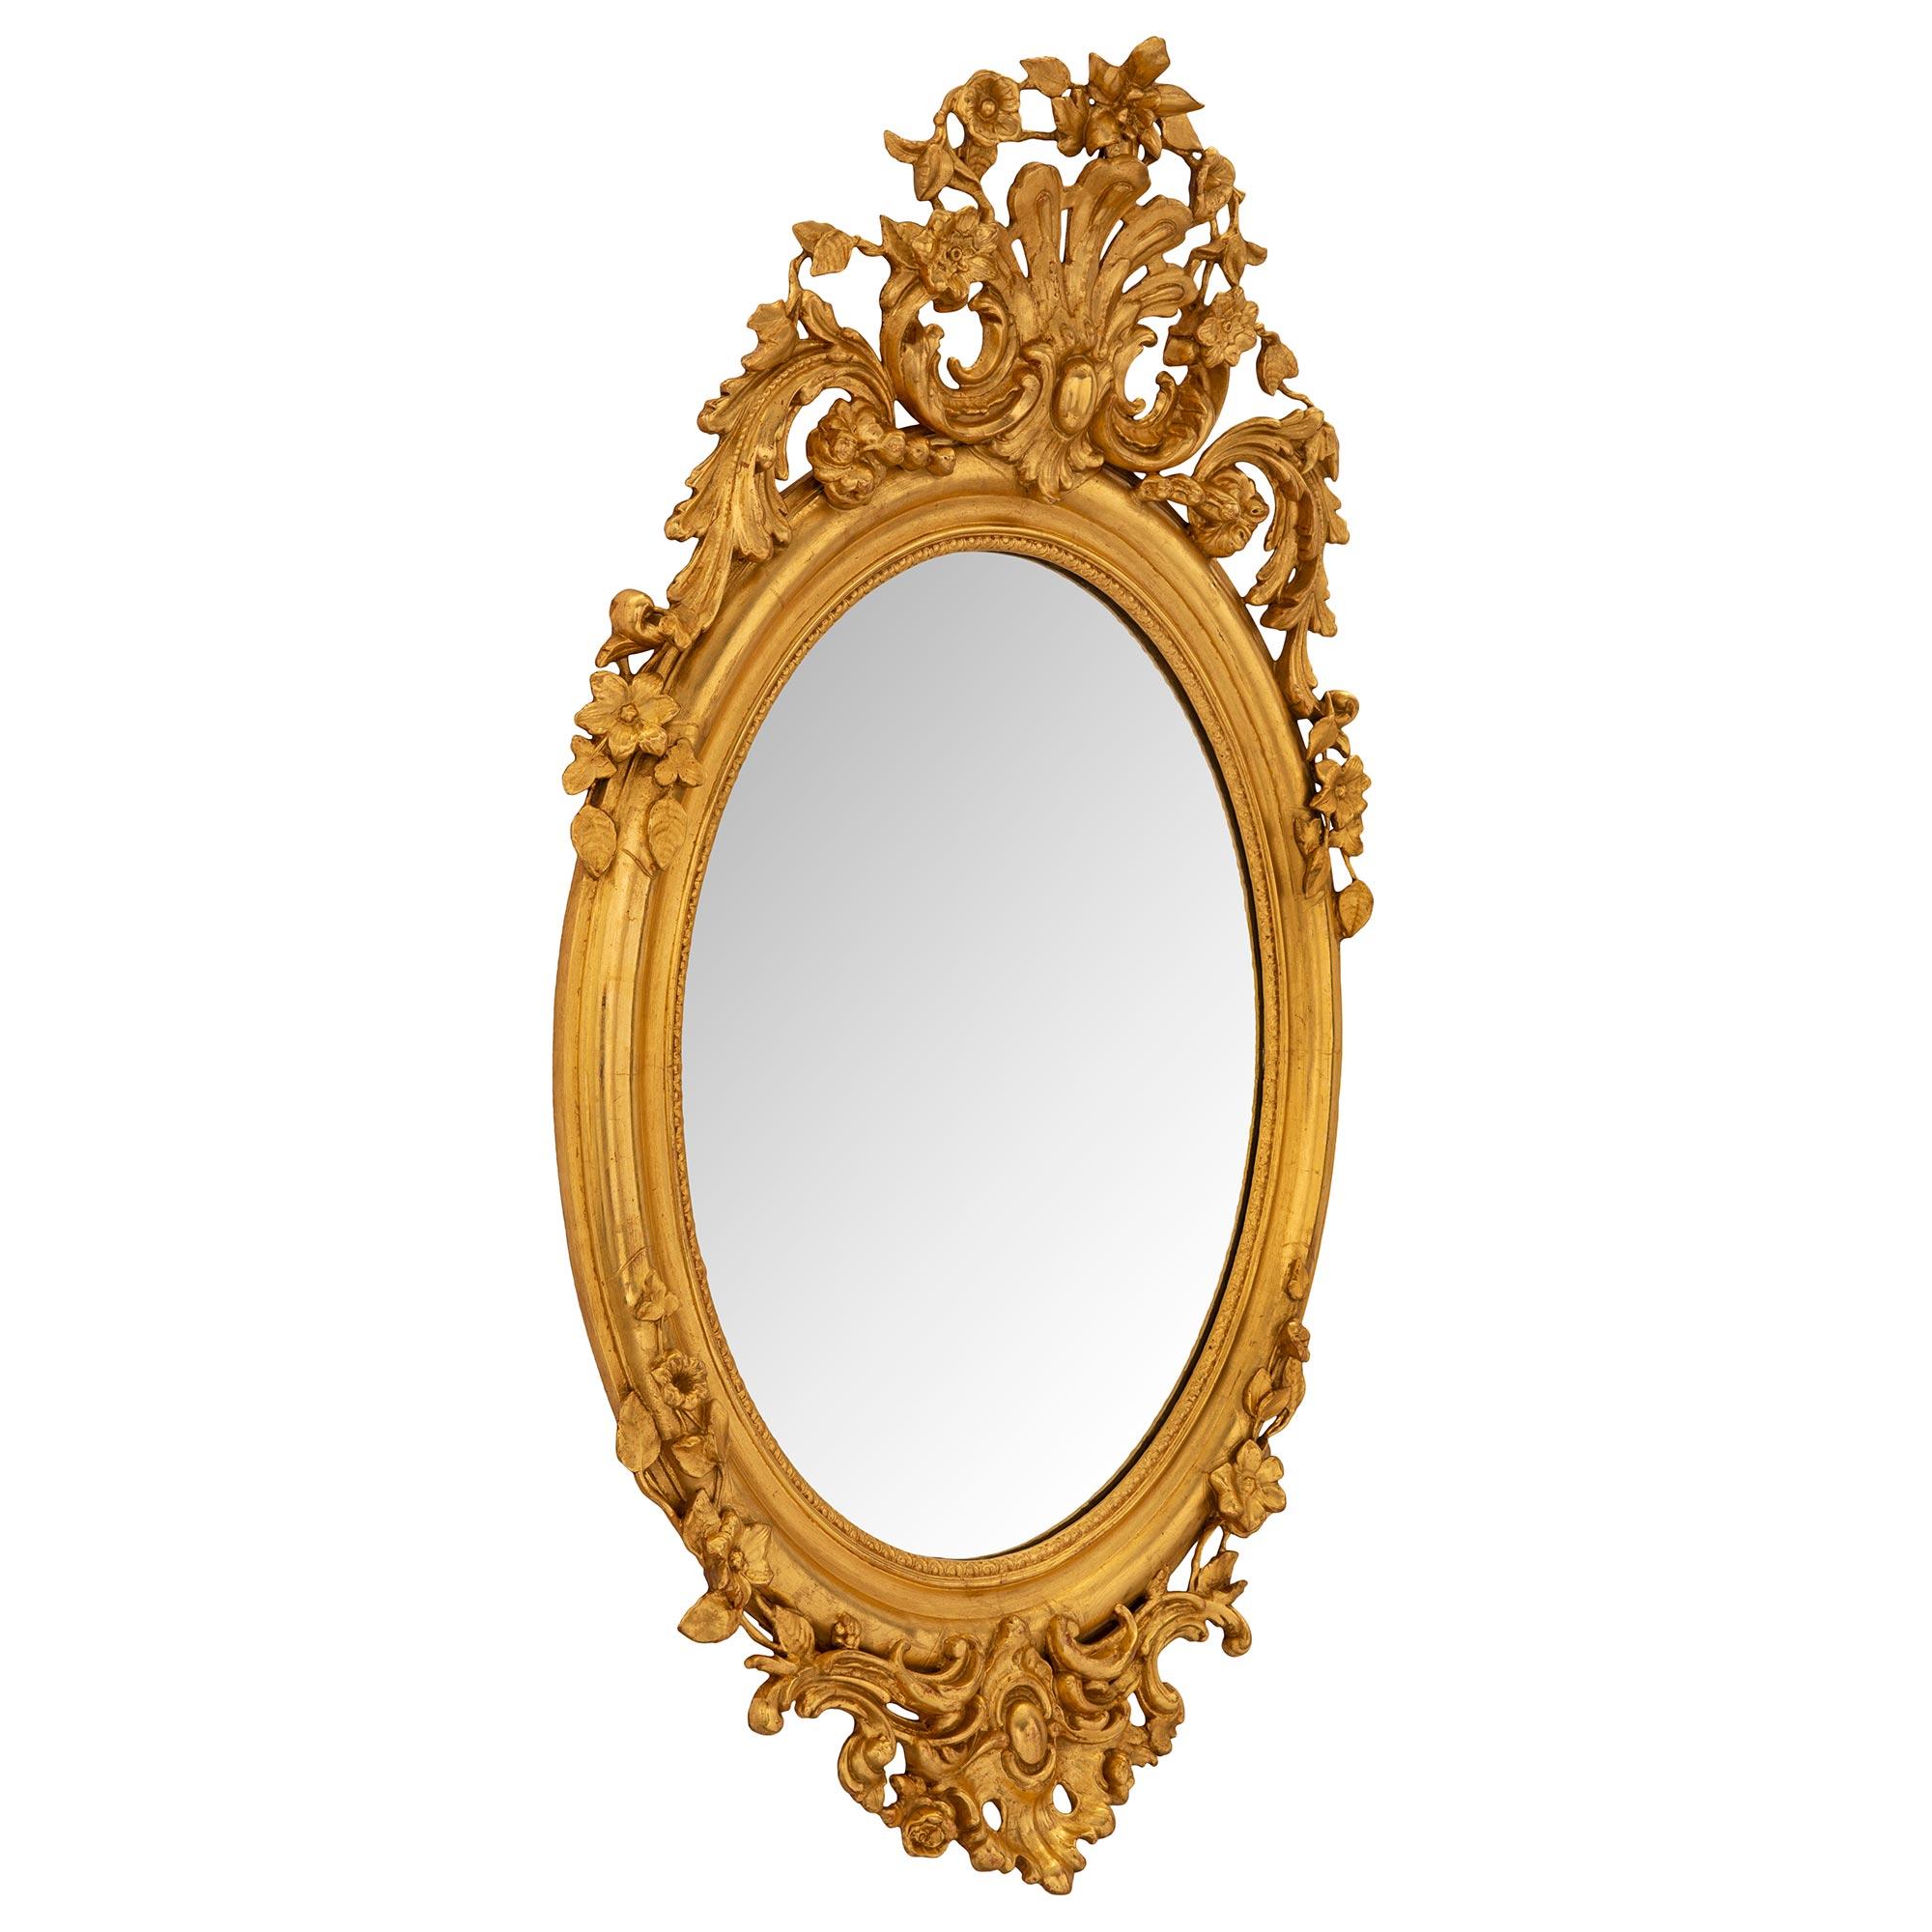 A striking and most elegant Italian 19th century Louis XV st. giltwood mirror. The oval mirror retains its original mirror plate set within a fine mottled framed with a lovely wrap around foliate band. At the base is a superb foliate reserve with a